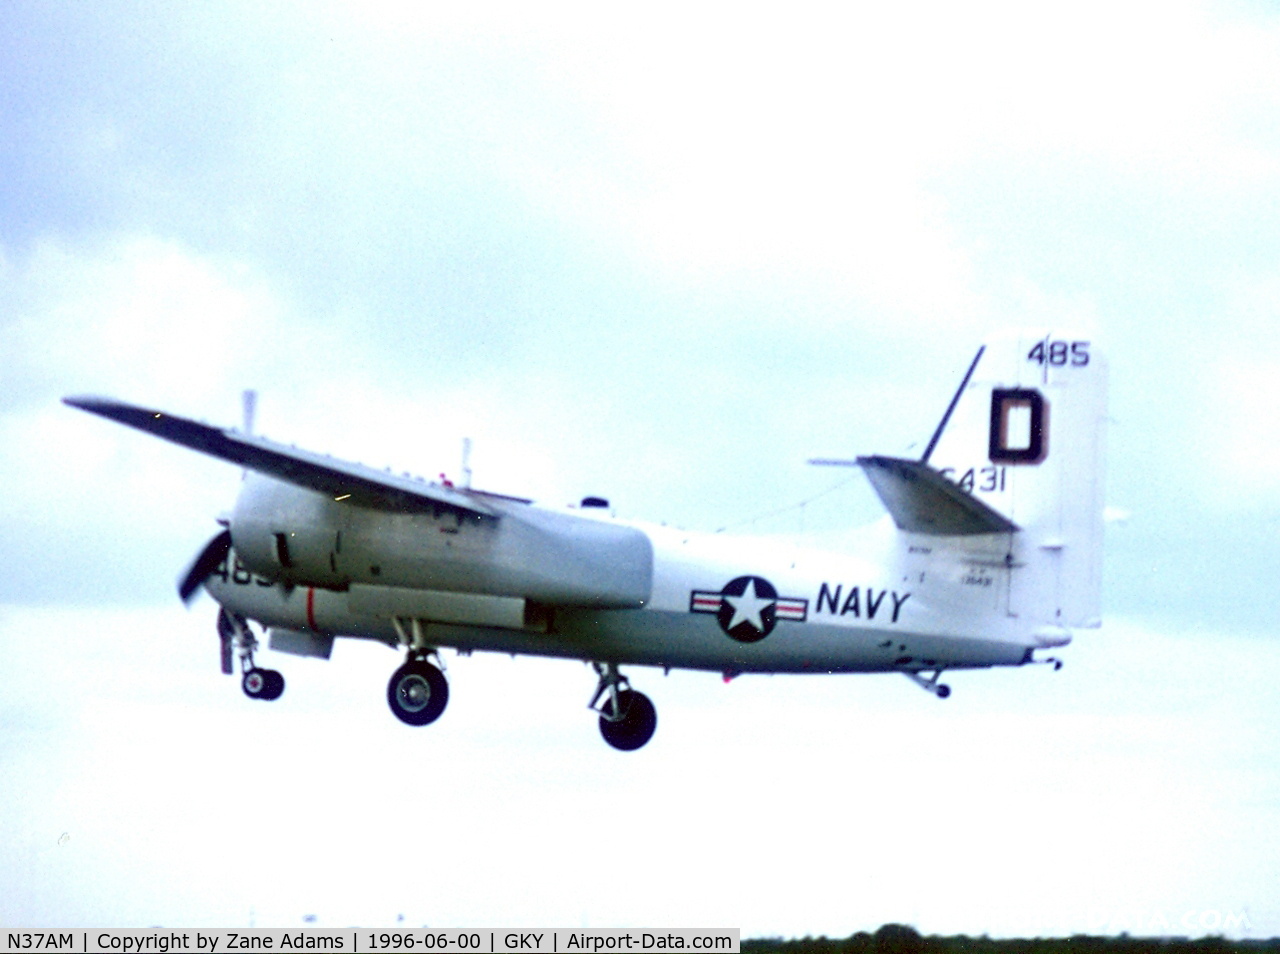 N37AM, 1959 Grumman US-2B Tracker (G89) C/N 340, Approaching storms causes a fast departure from Arlington Municipal Open House